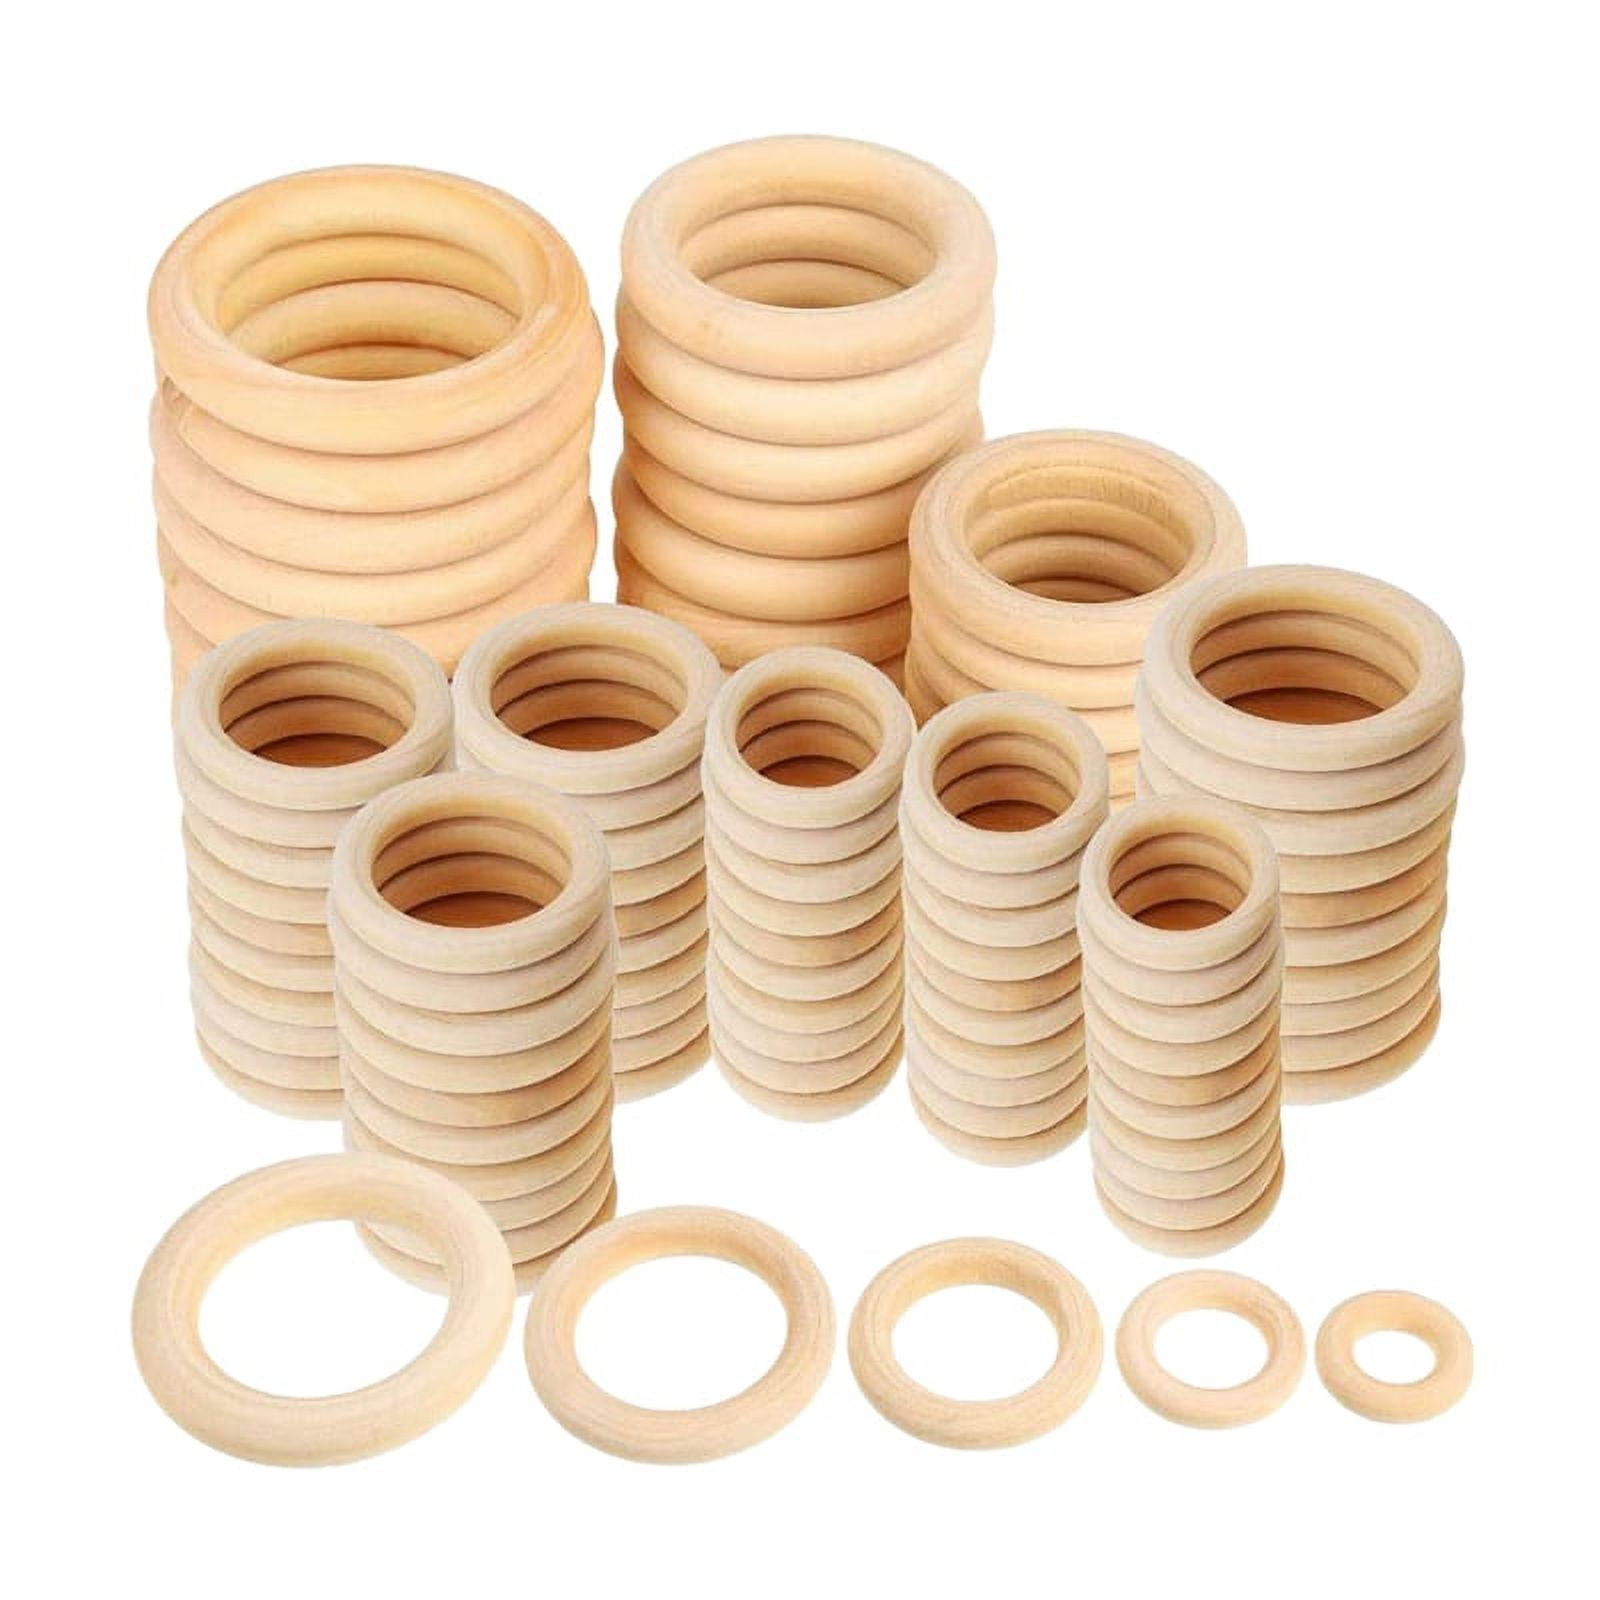 Wooden Rings for Crafts 30 PCS 55 mm Unfinished Wood Ring for Macrame Solid  Natural Wood Rings for DIY Craft Pendant Connectors Jewelry Making